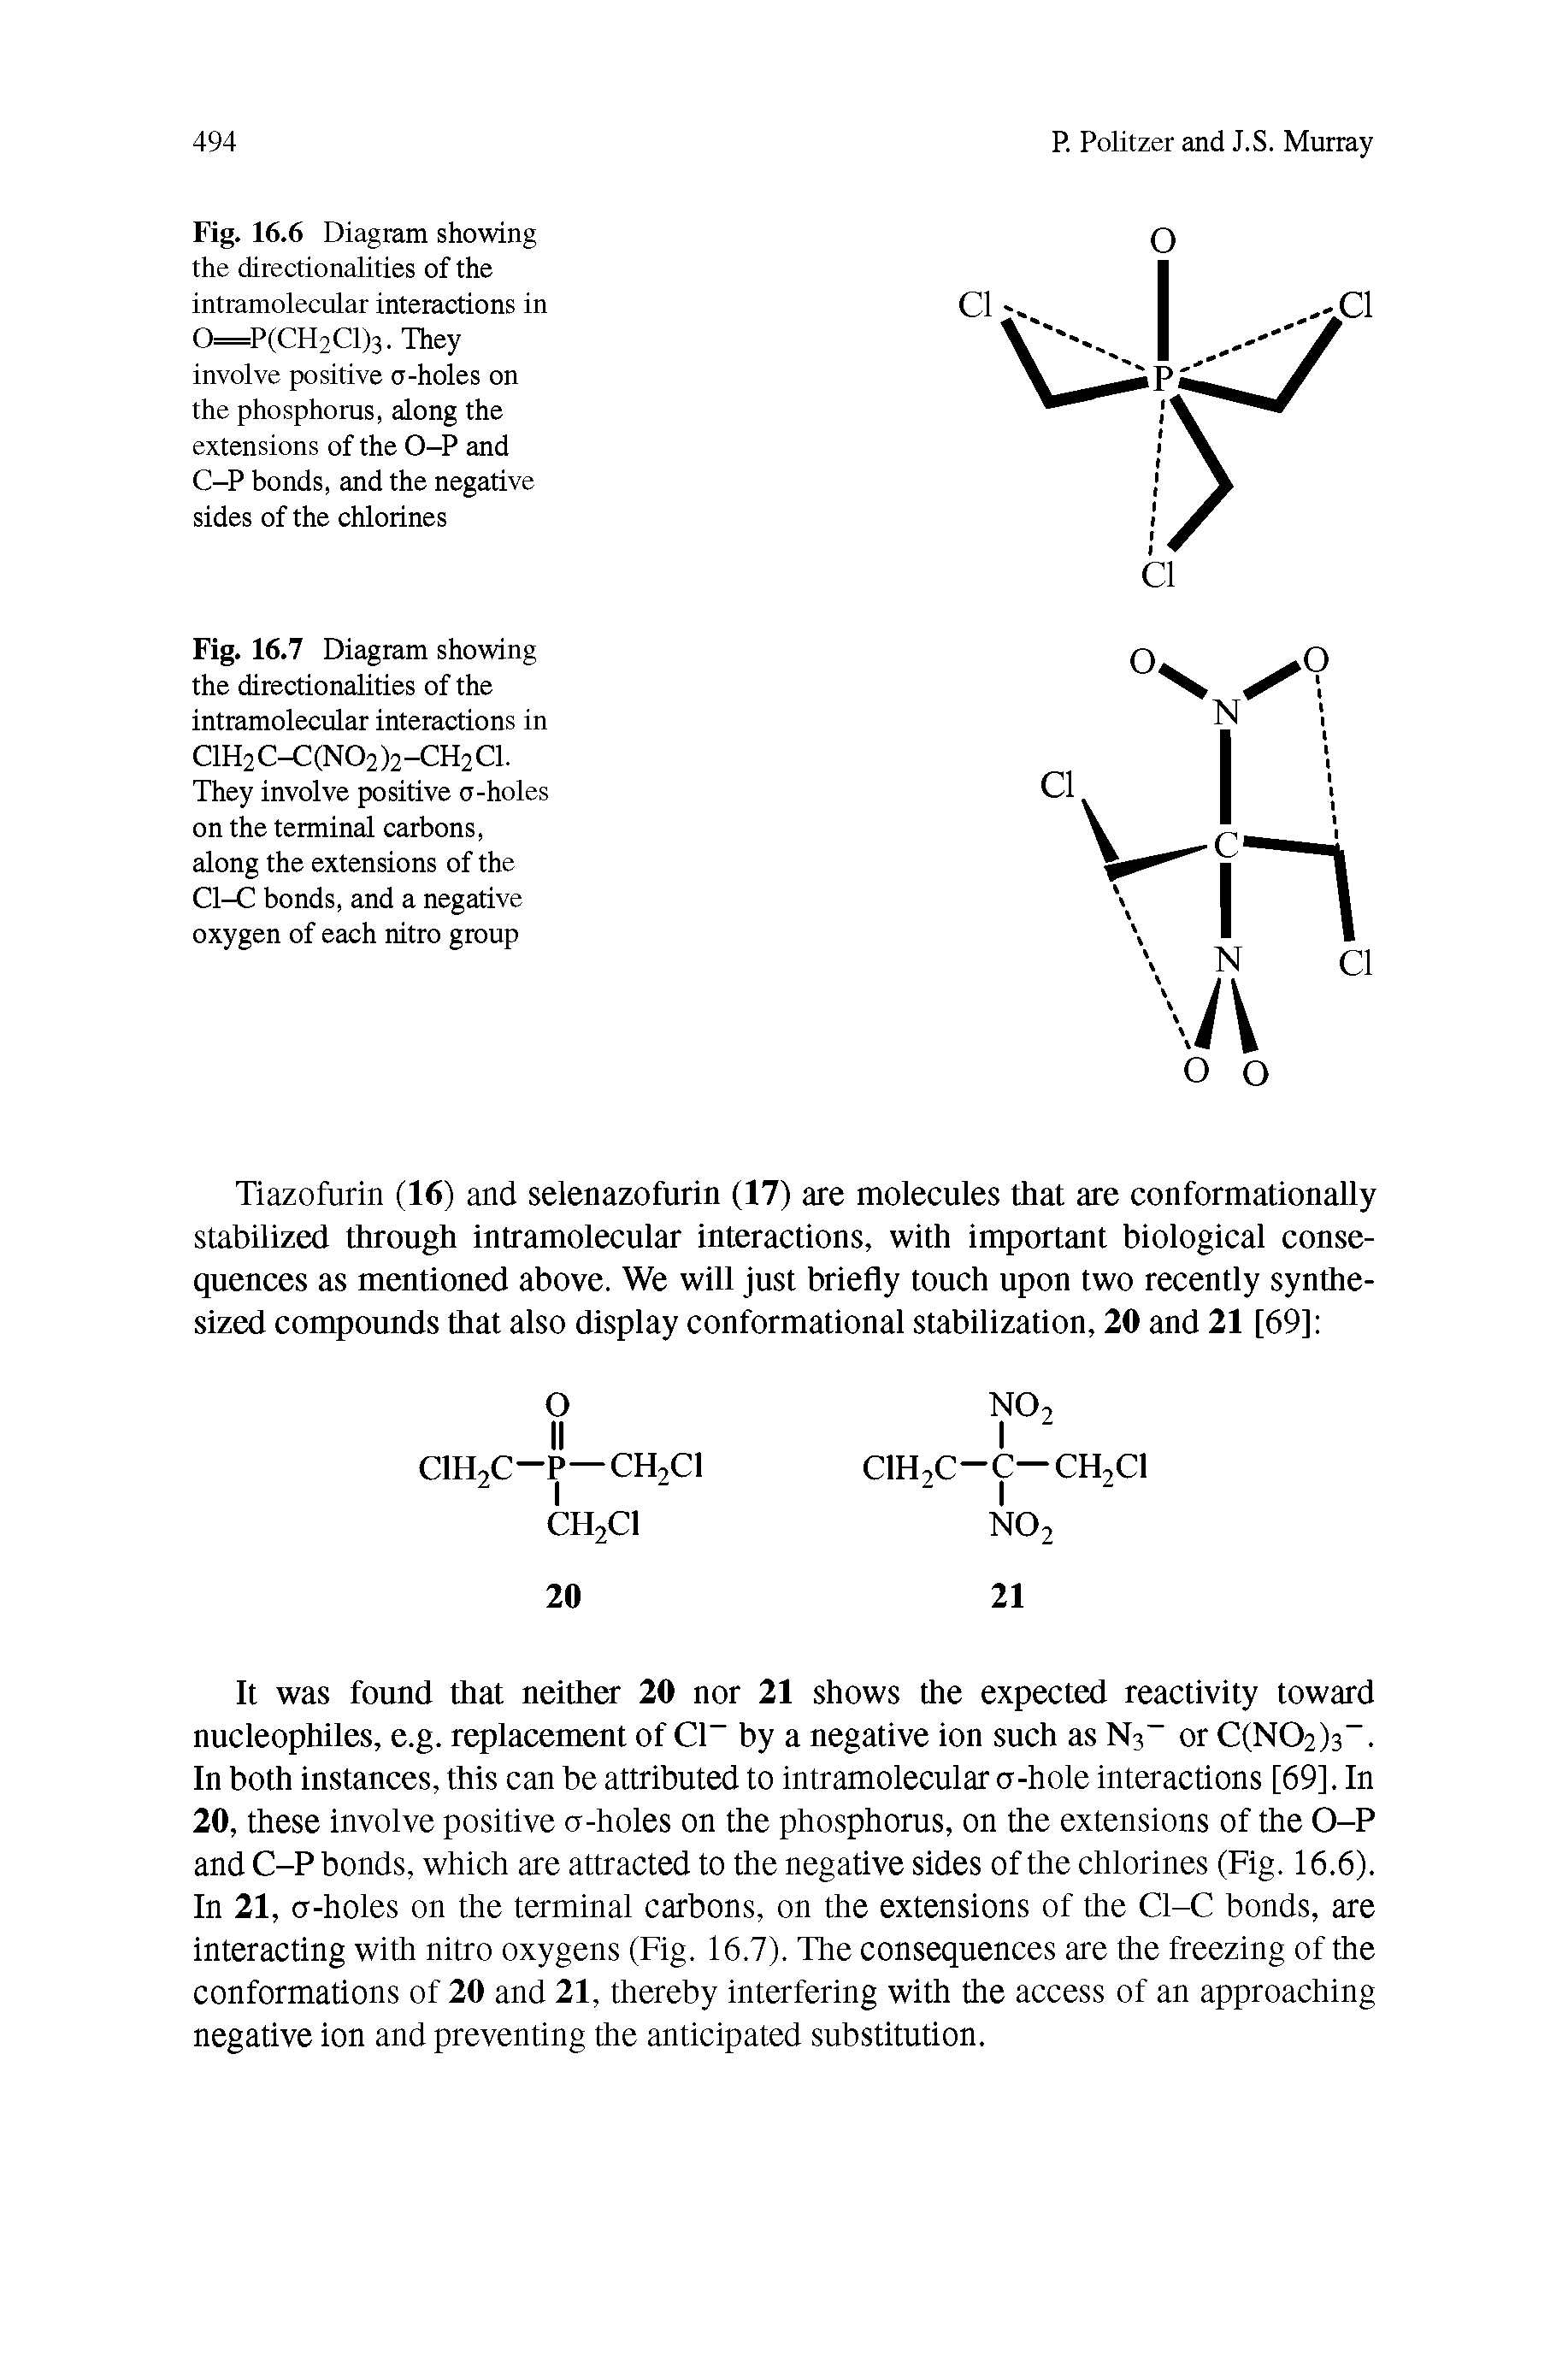 Fig. 16.6 Diagram showing the directionalities of the intramolecular interactions in O—P(CH2C1)3. They involve positive o-holes on the phosphorus, along the extensions of the 0-P and C-P bonds, and the negative sides of the chlorines...